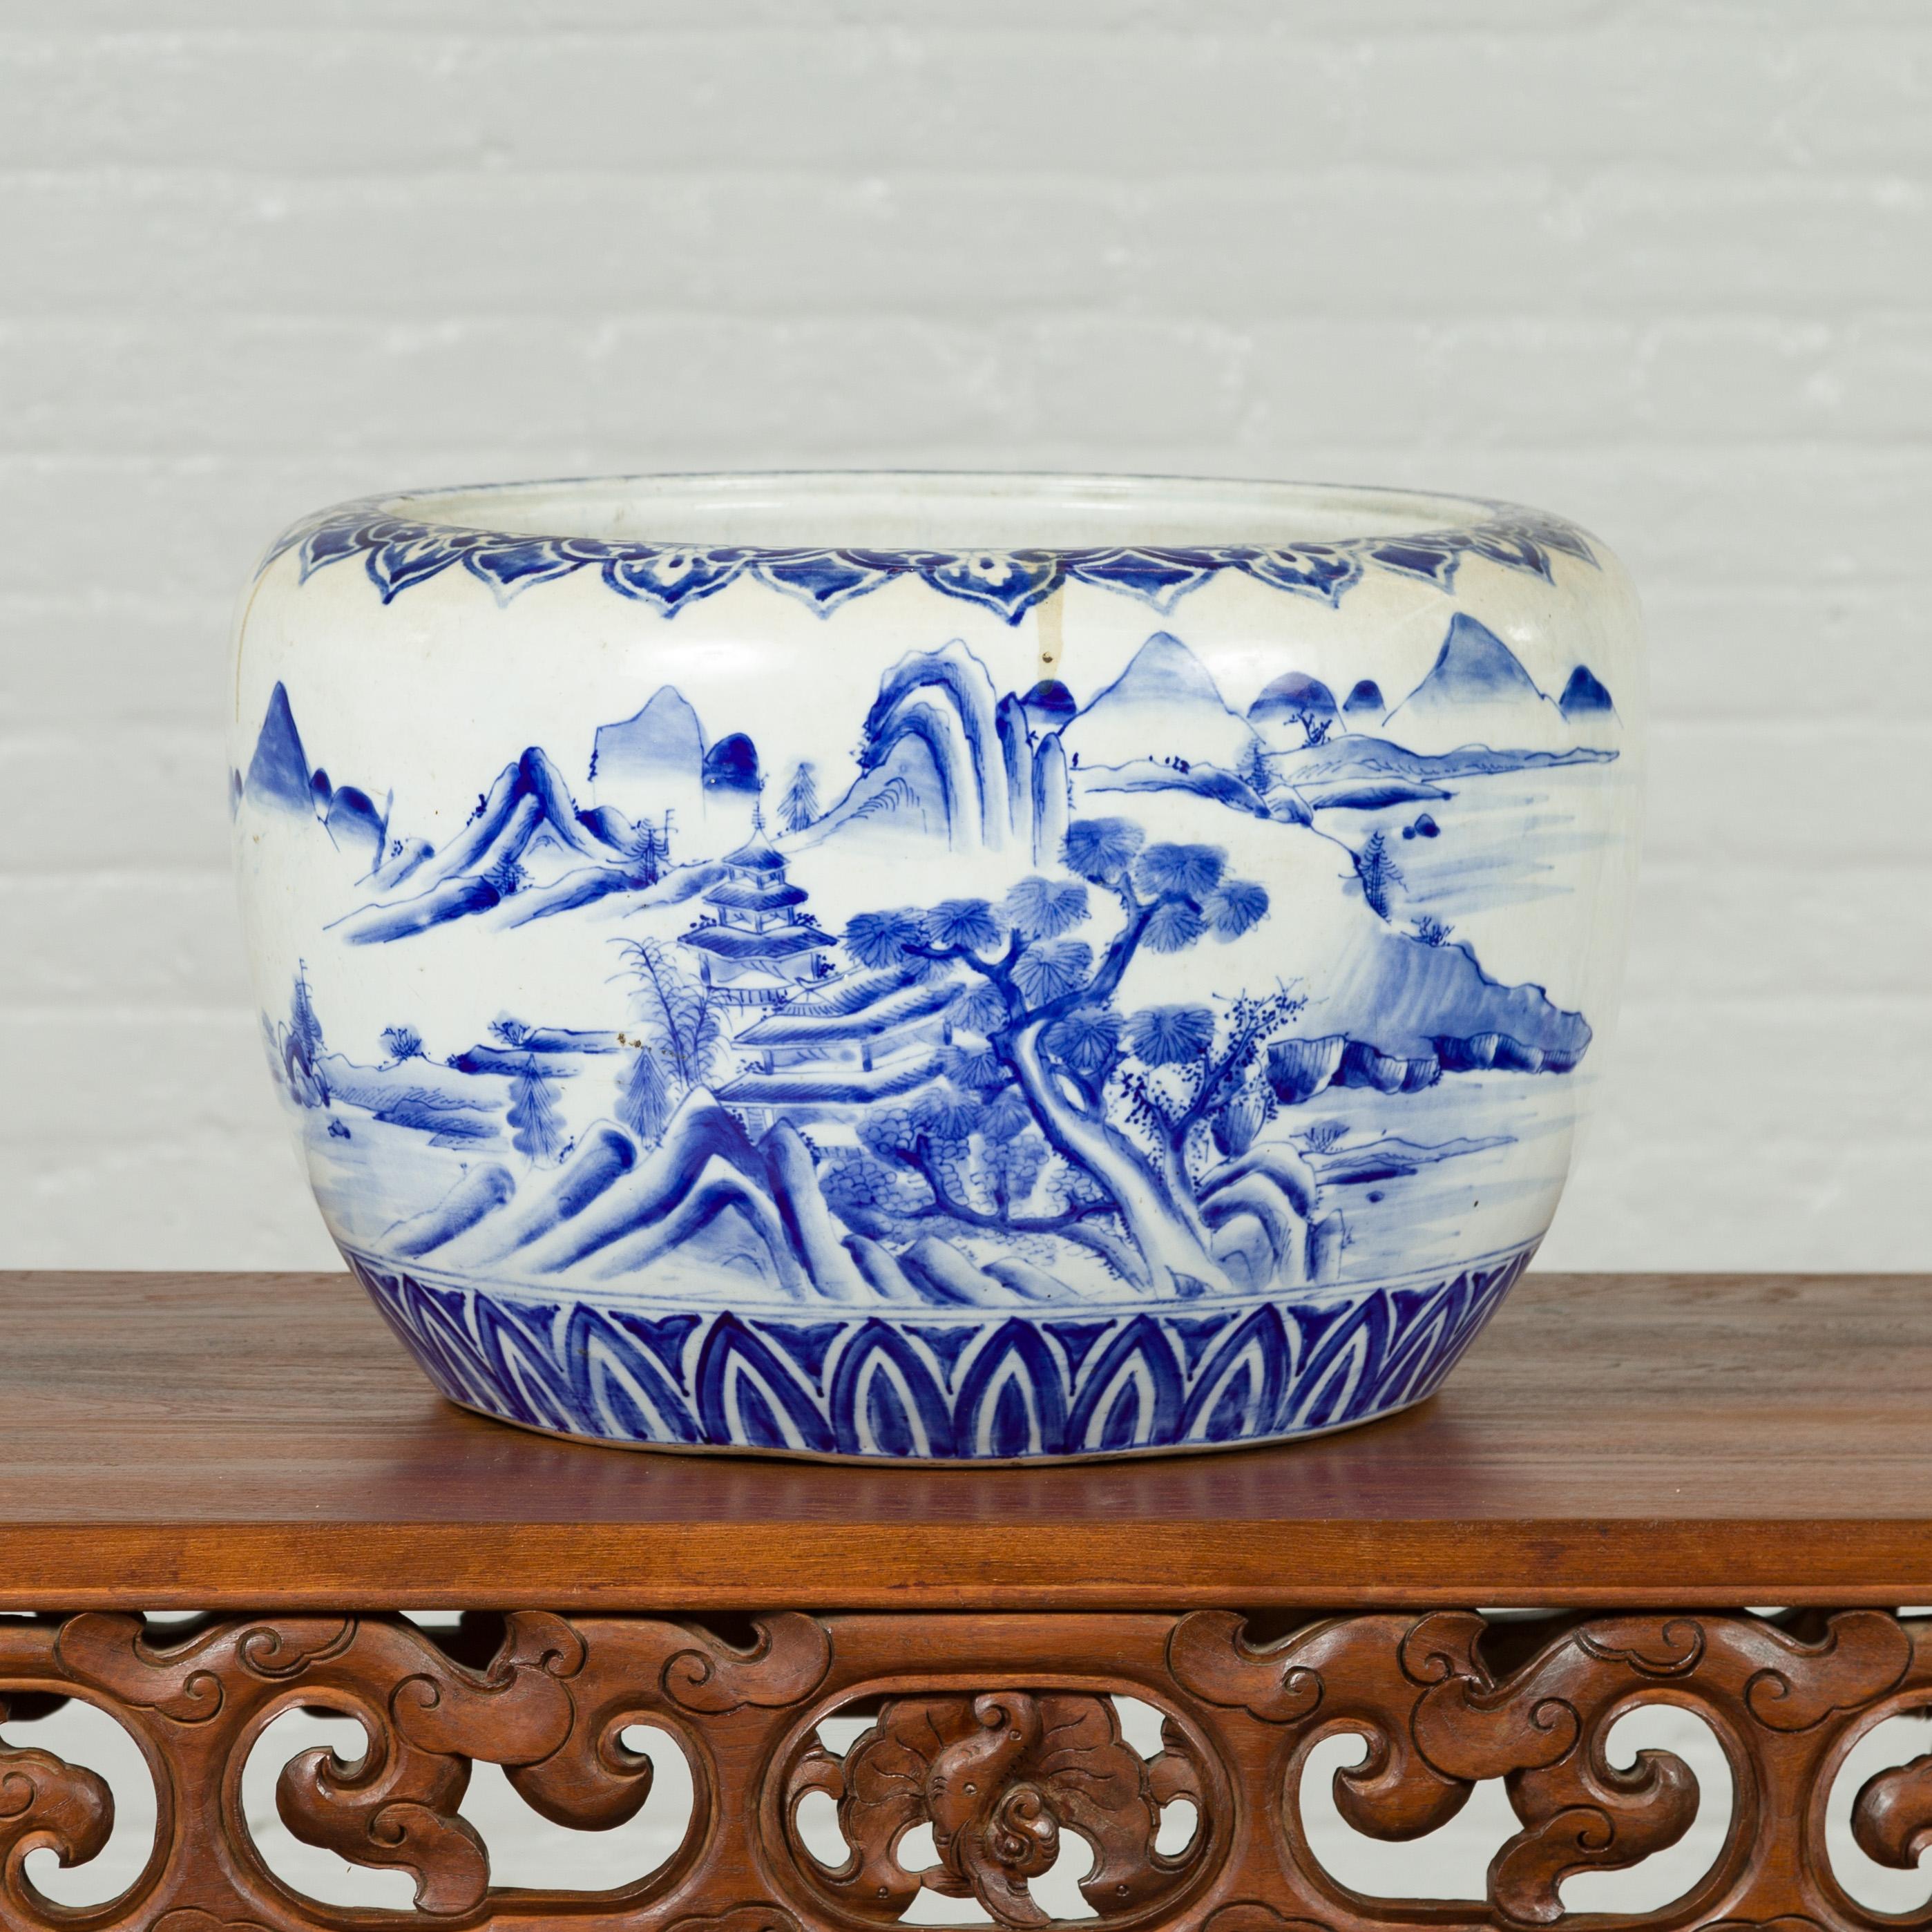 Japanese Meiji Period 19th Century Blue and White Round Porcelain Planter For Sale 6